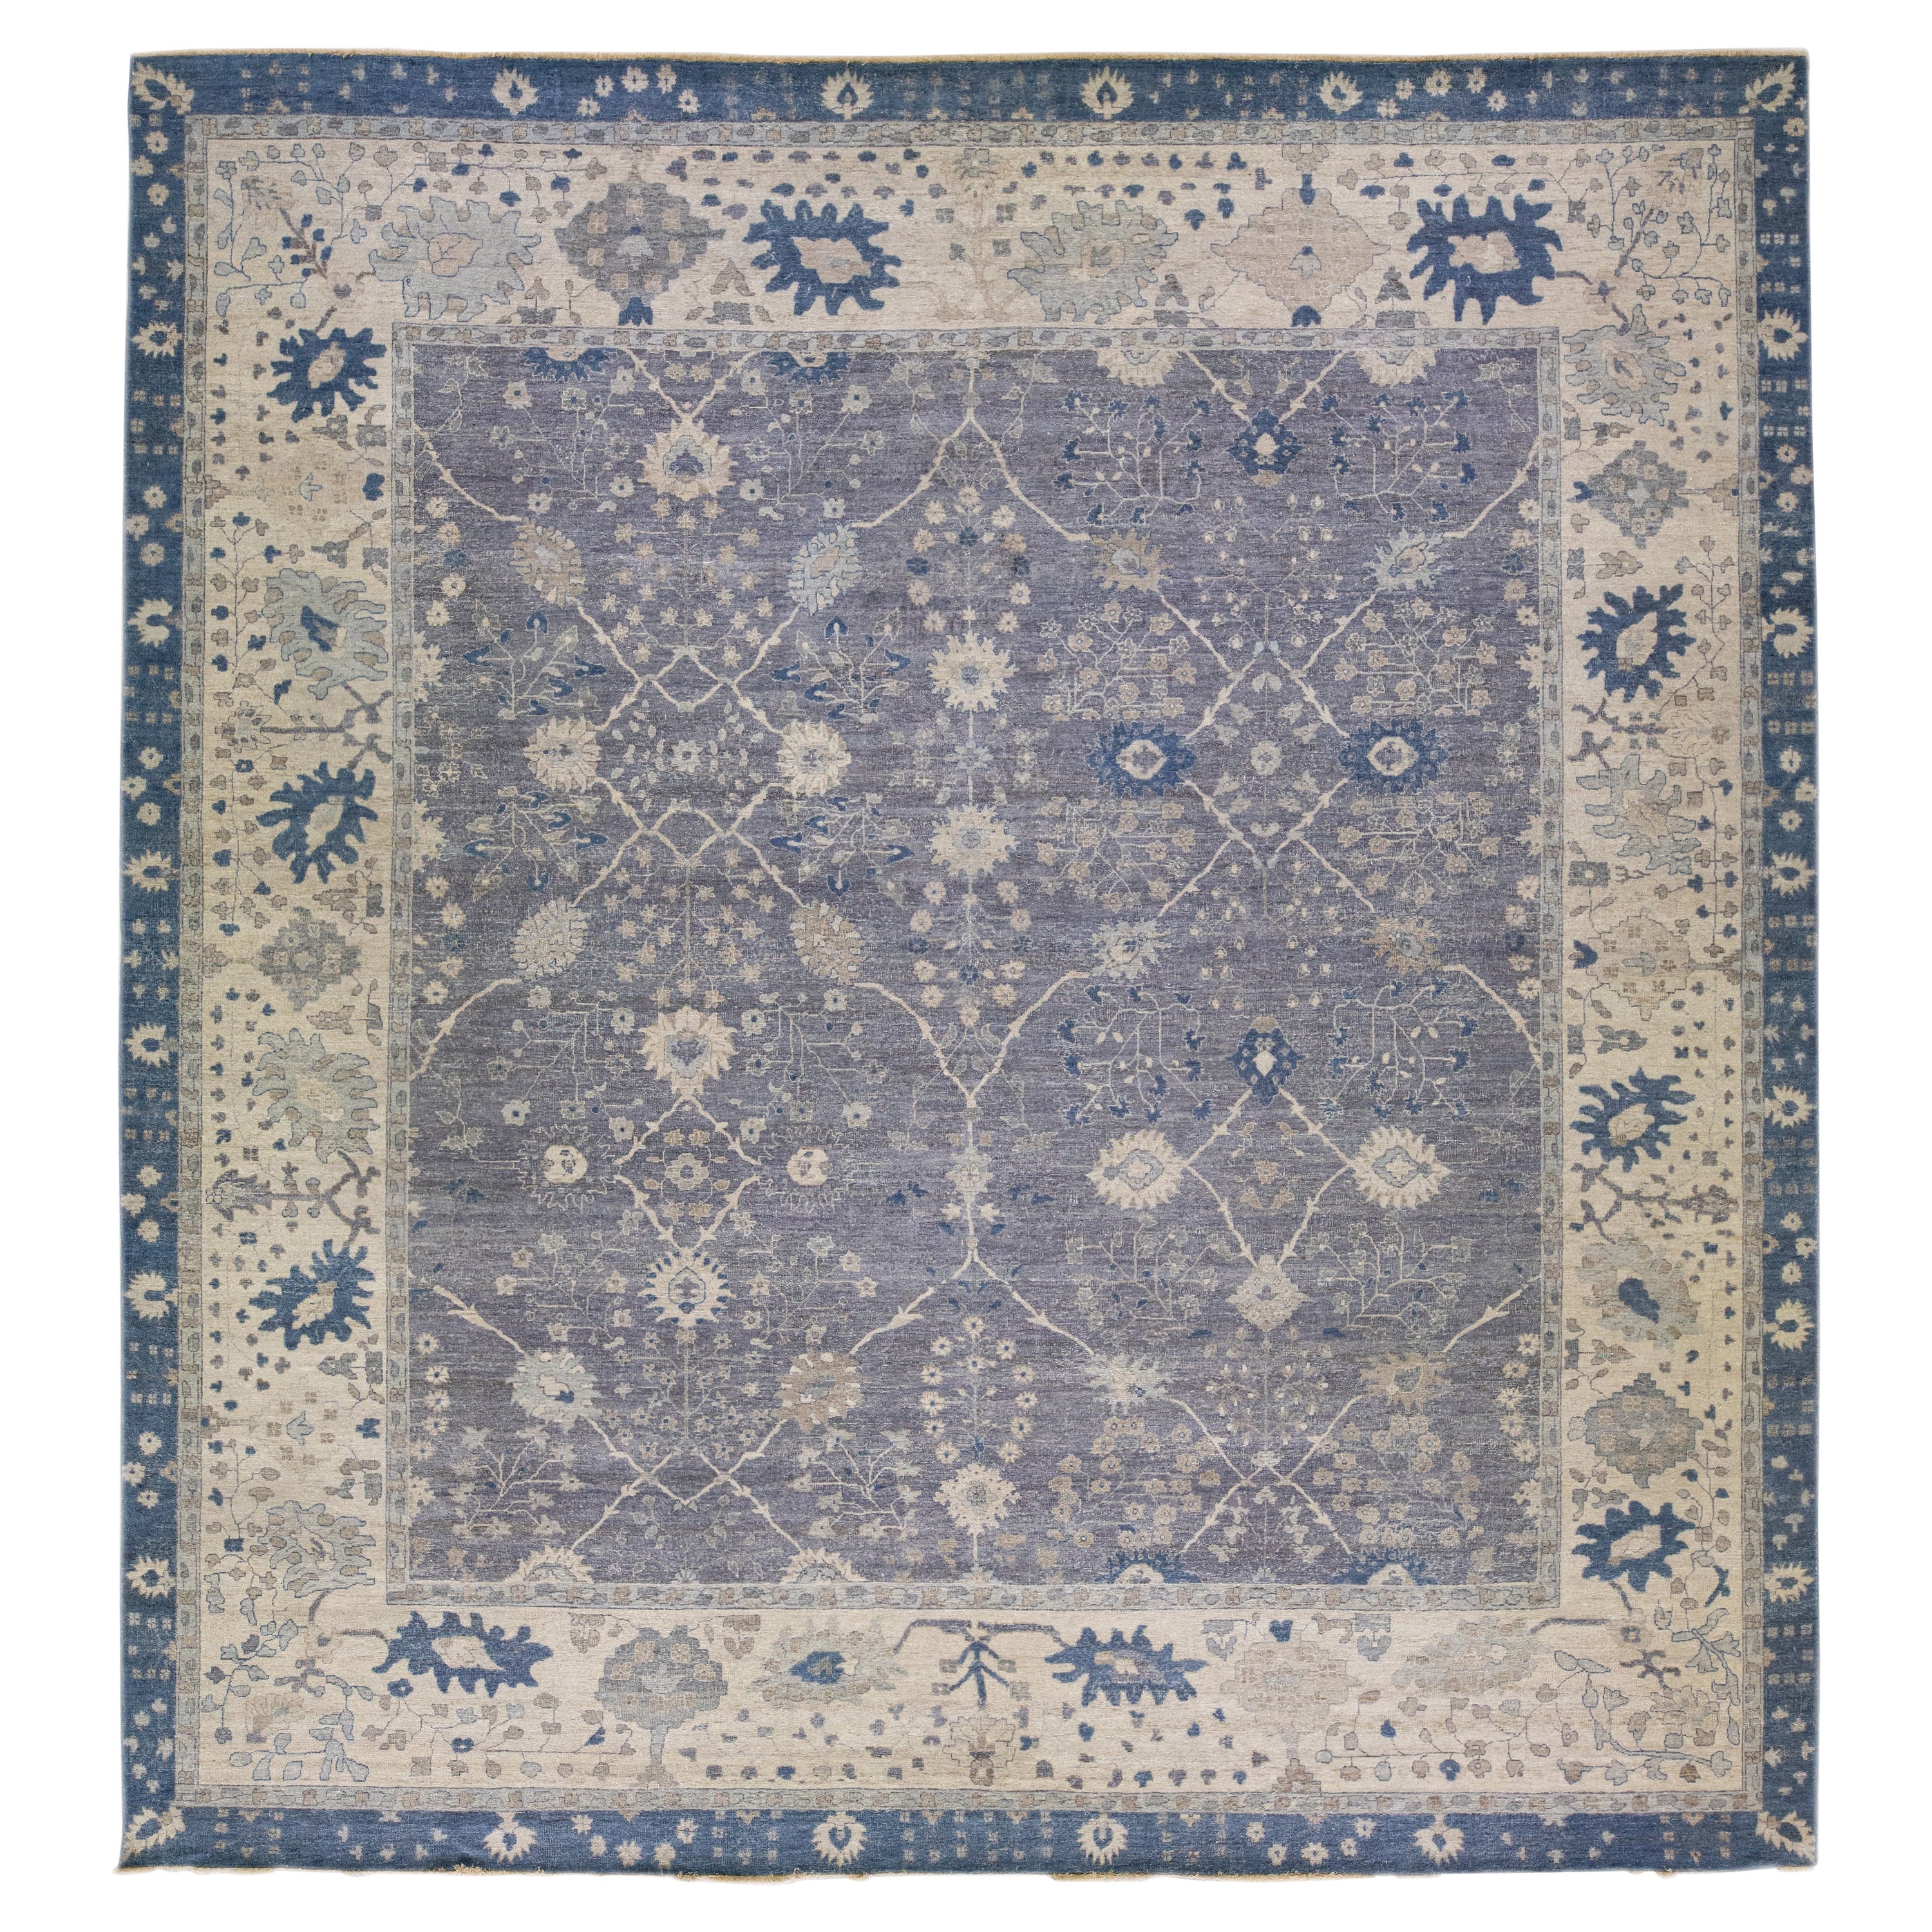 Modern Indian Mahal Square Wool Rug in Gray With Floral Motif by Apadana For Sale